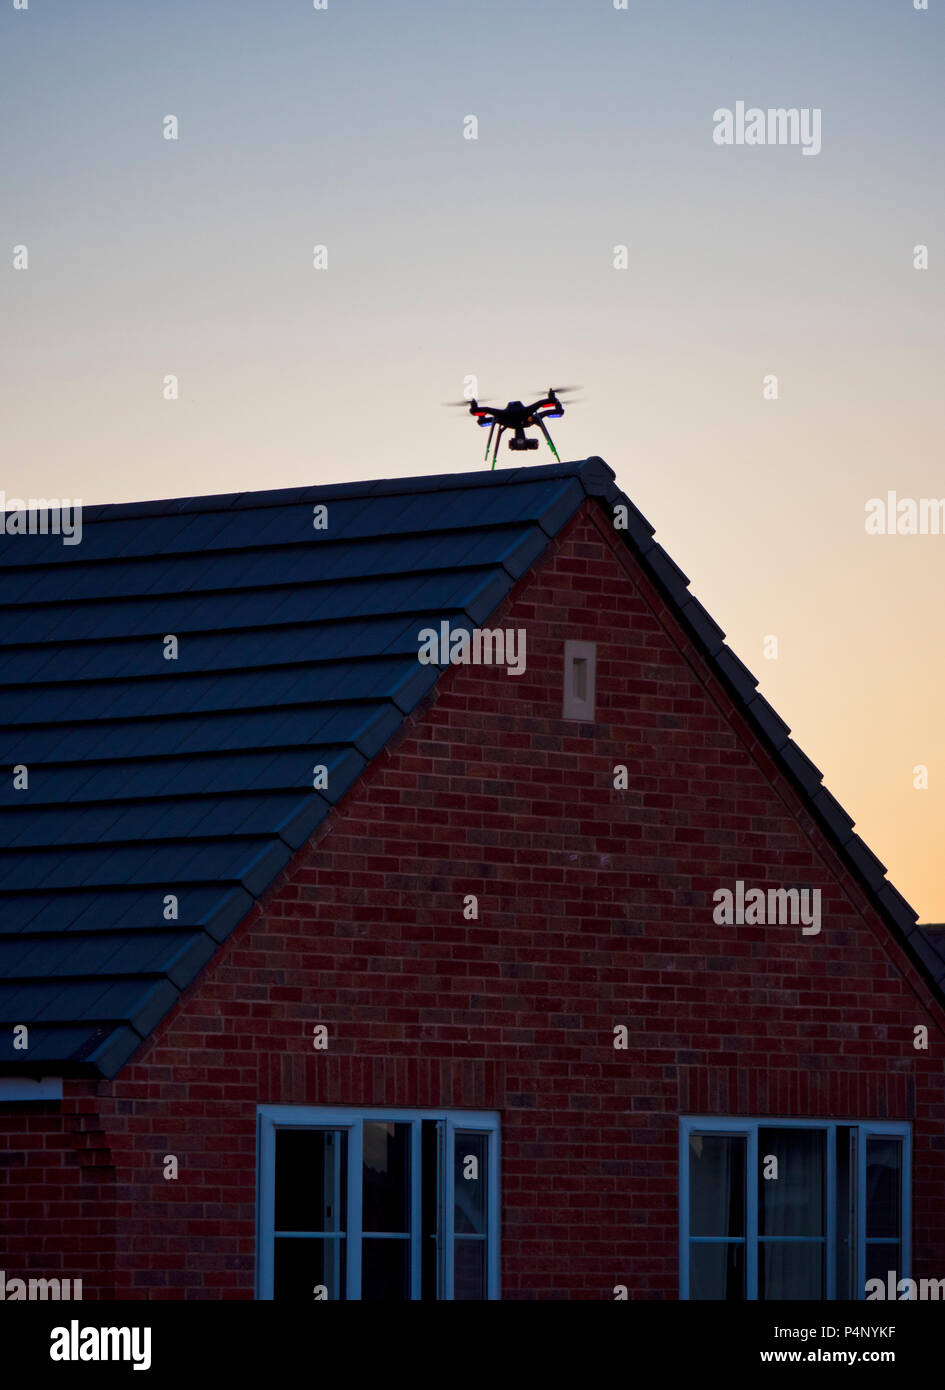 Derbyshire, UK. 22nd June 2018. Drone being flown dangerously close to a property on a built-up housing estate in Ashbourne, Derbyshire therefore not complying to The Drone Code Credit: Doug Blane/Alamy Live News Stock Photo